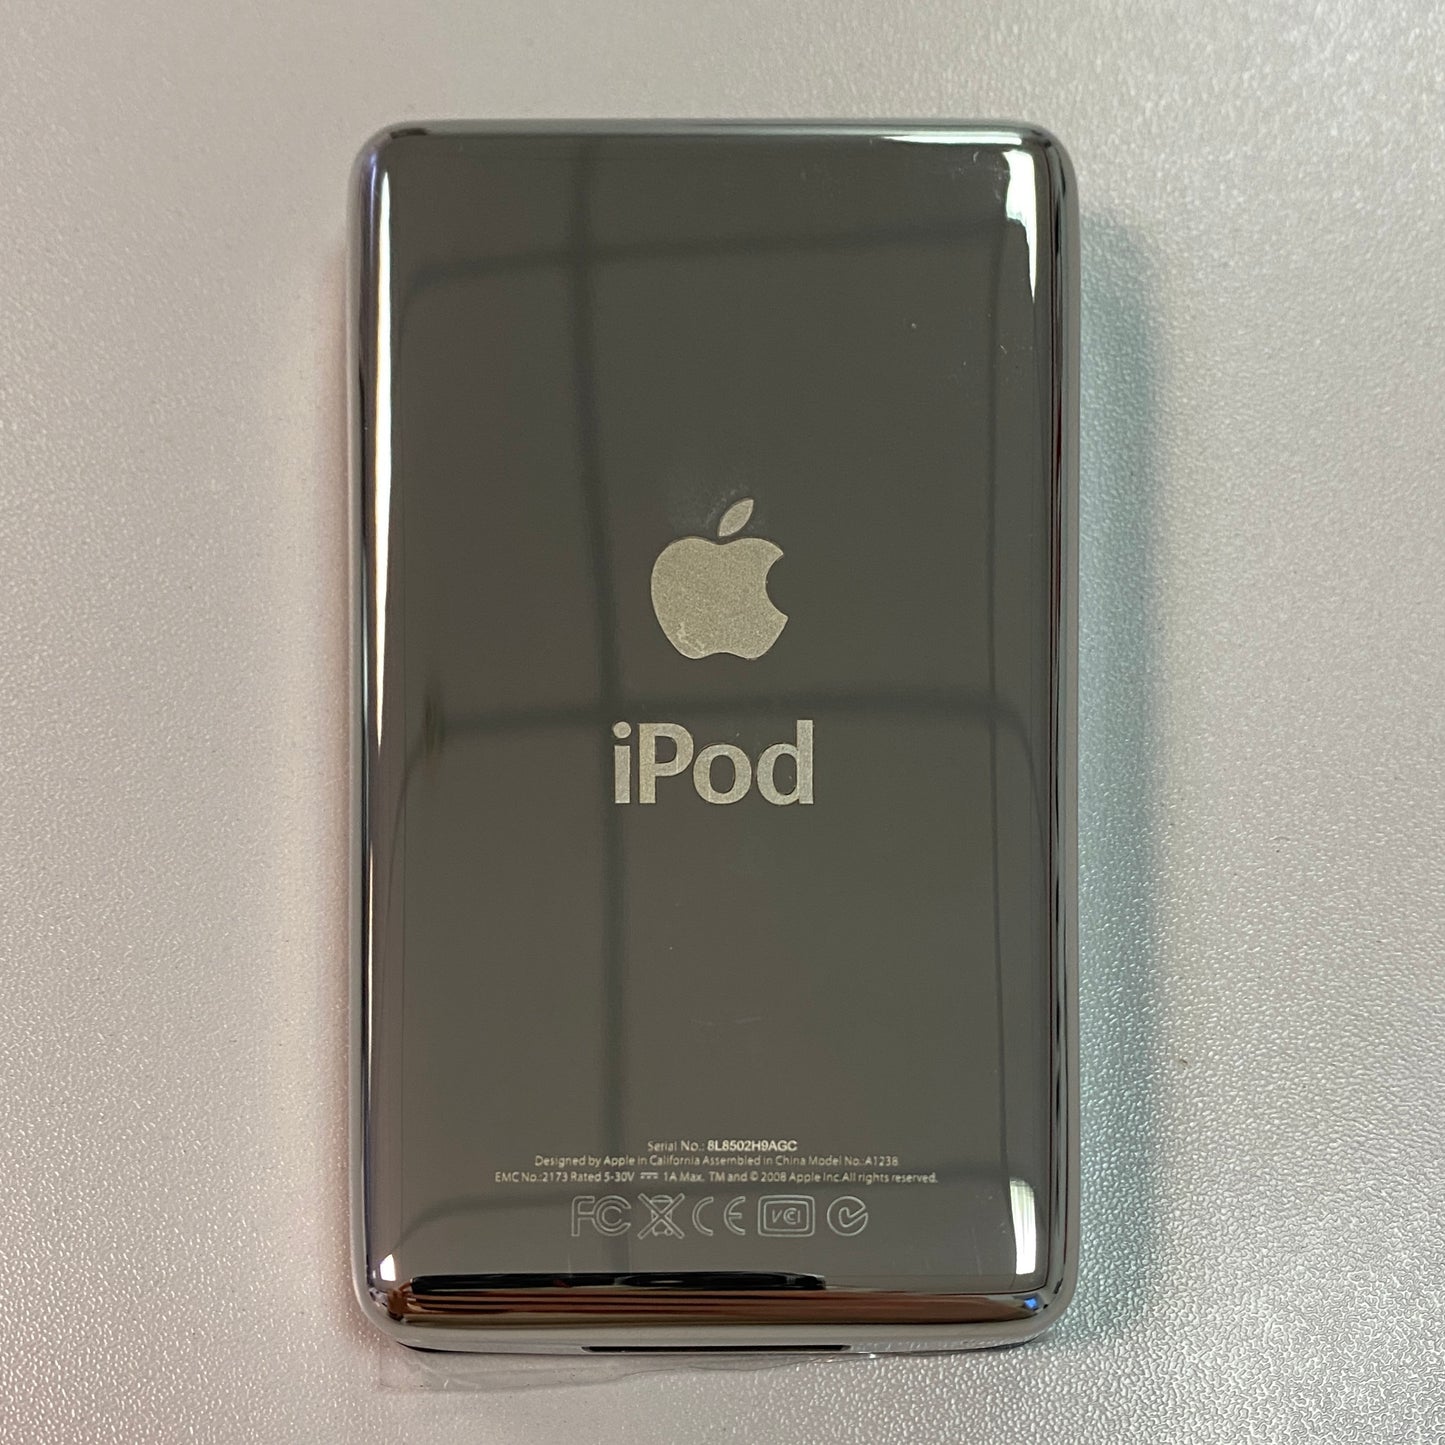 iPod Classic 6th Gen upgraded SDXC Personalized Media Player